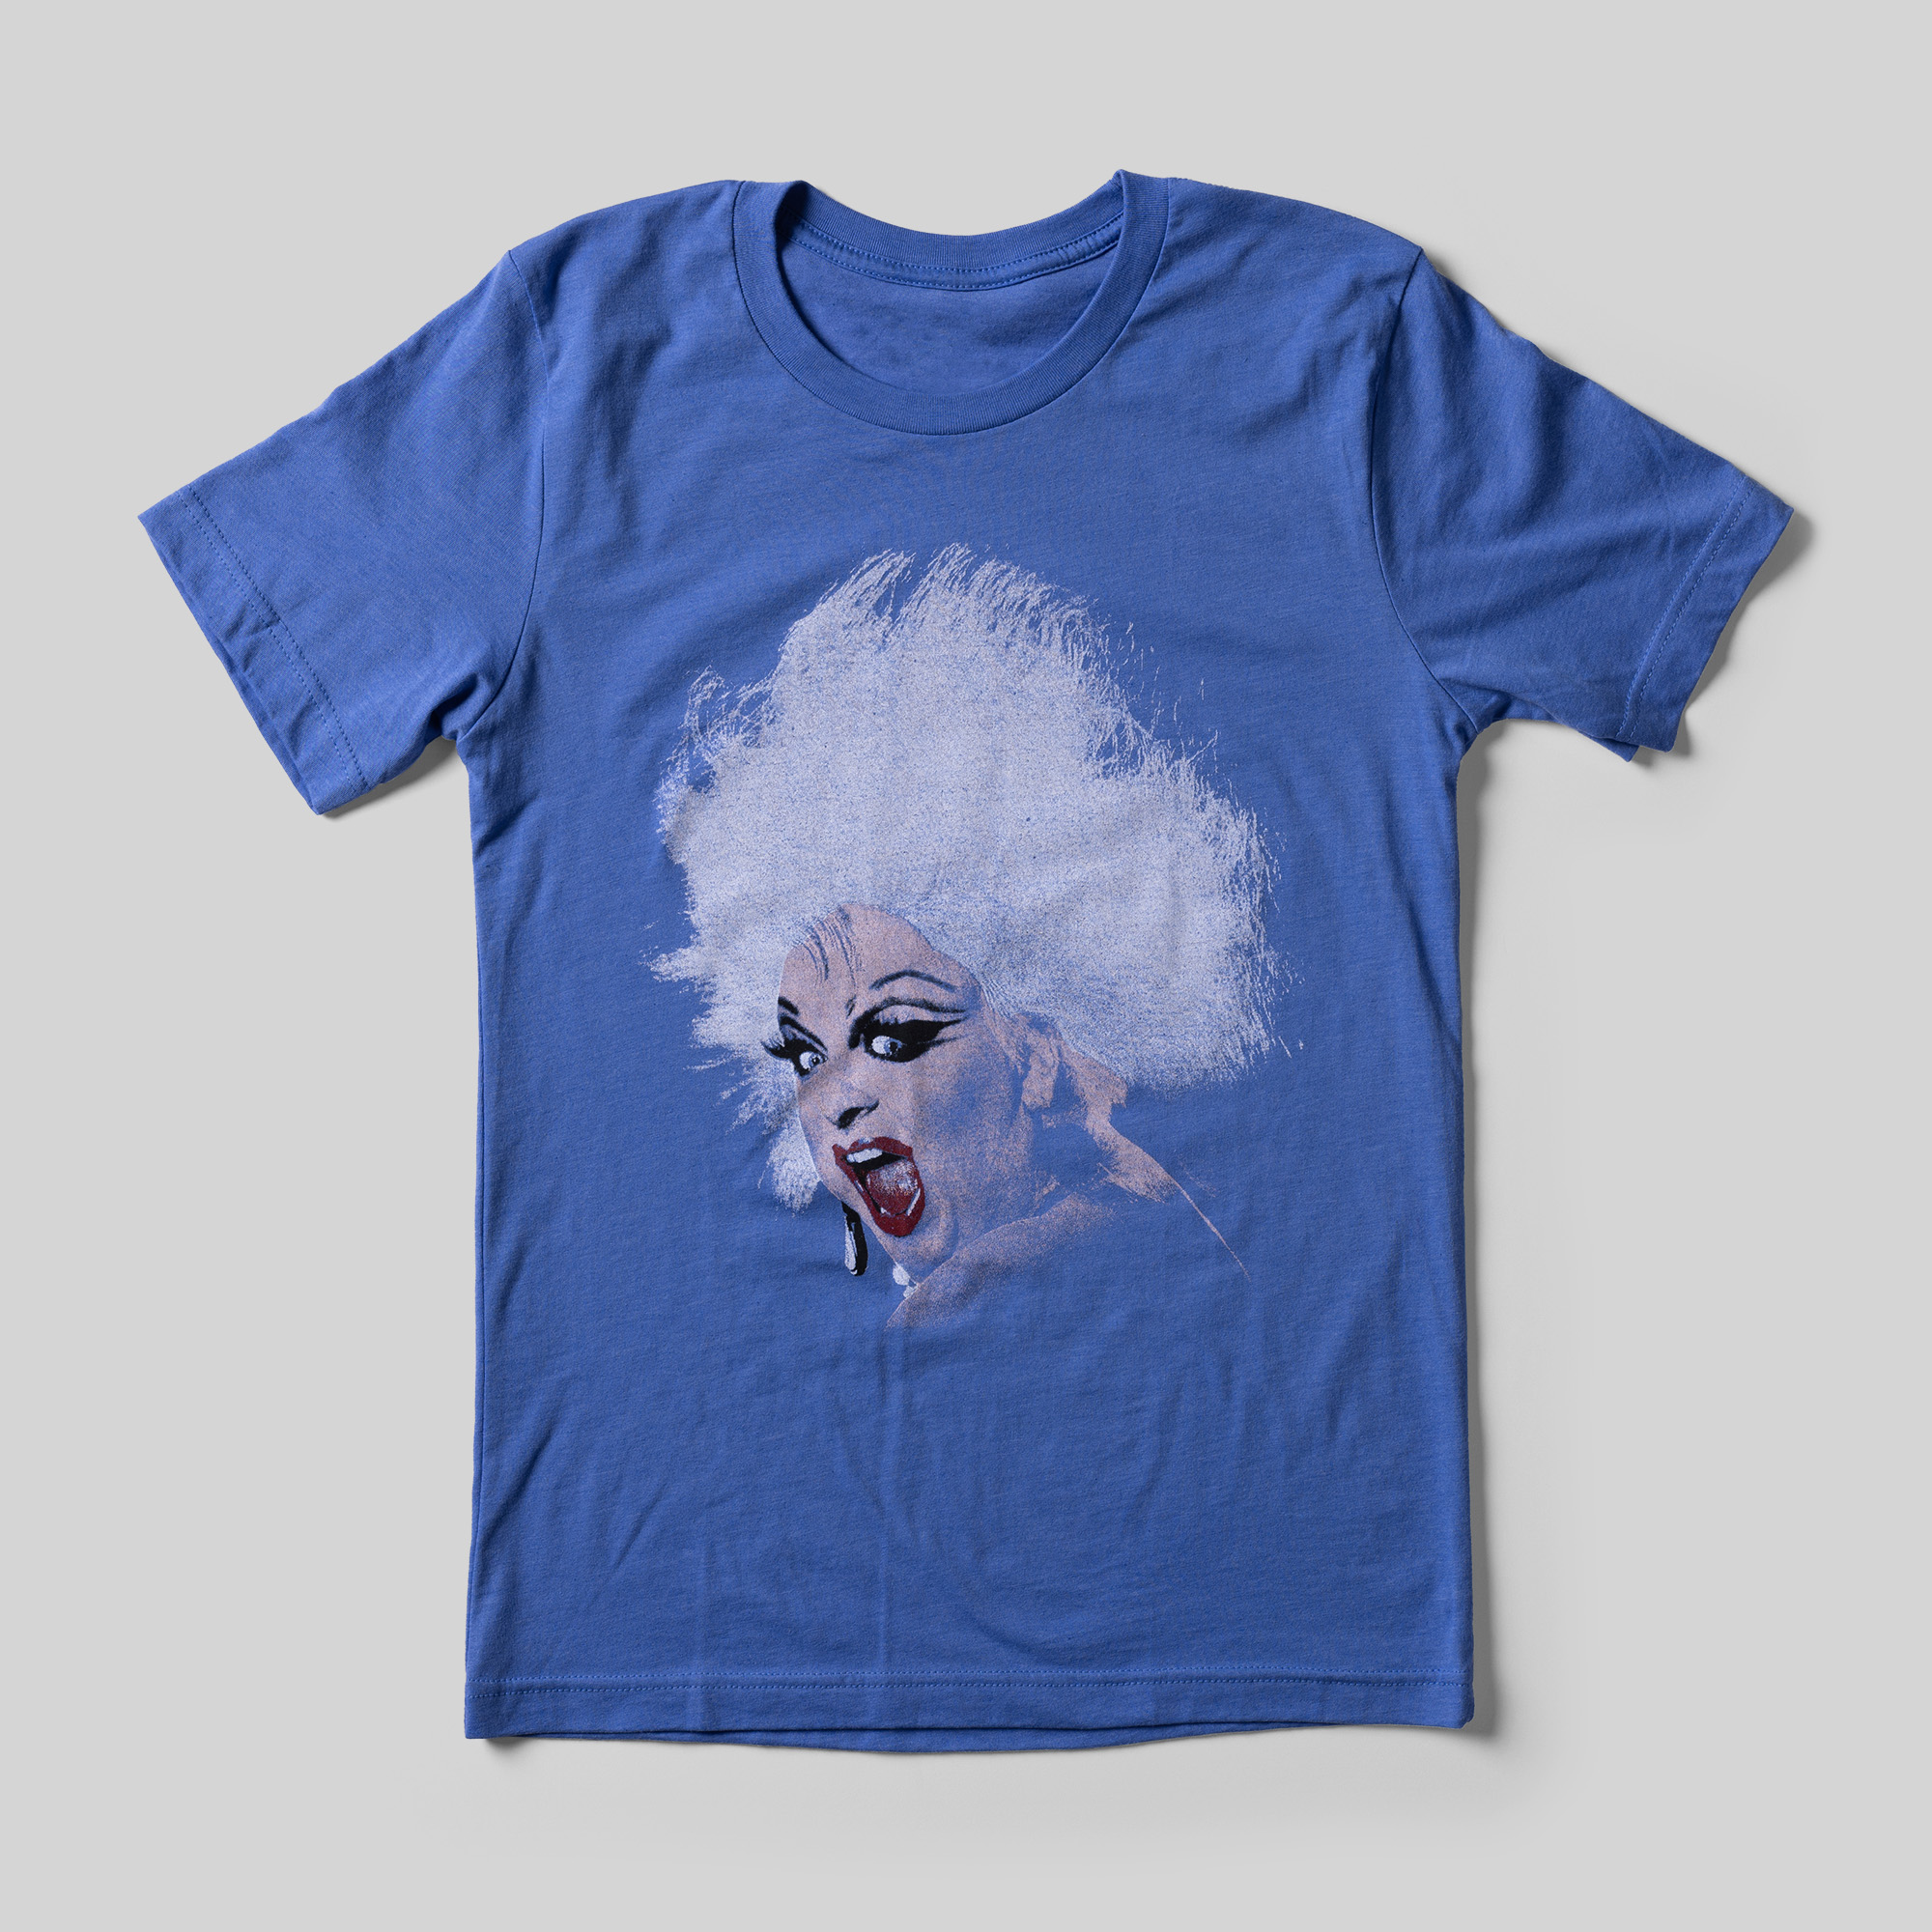 A blue t-shirt with an illustration of Divine.